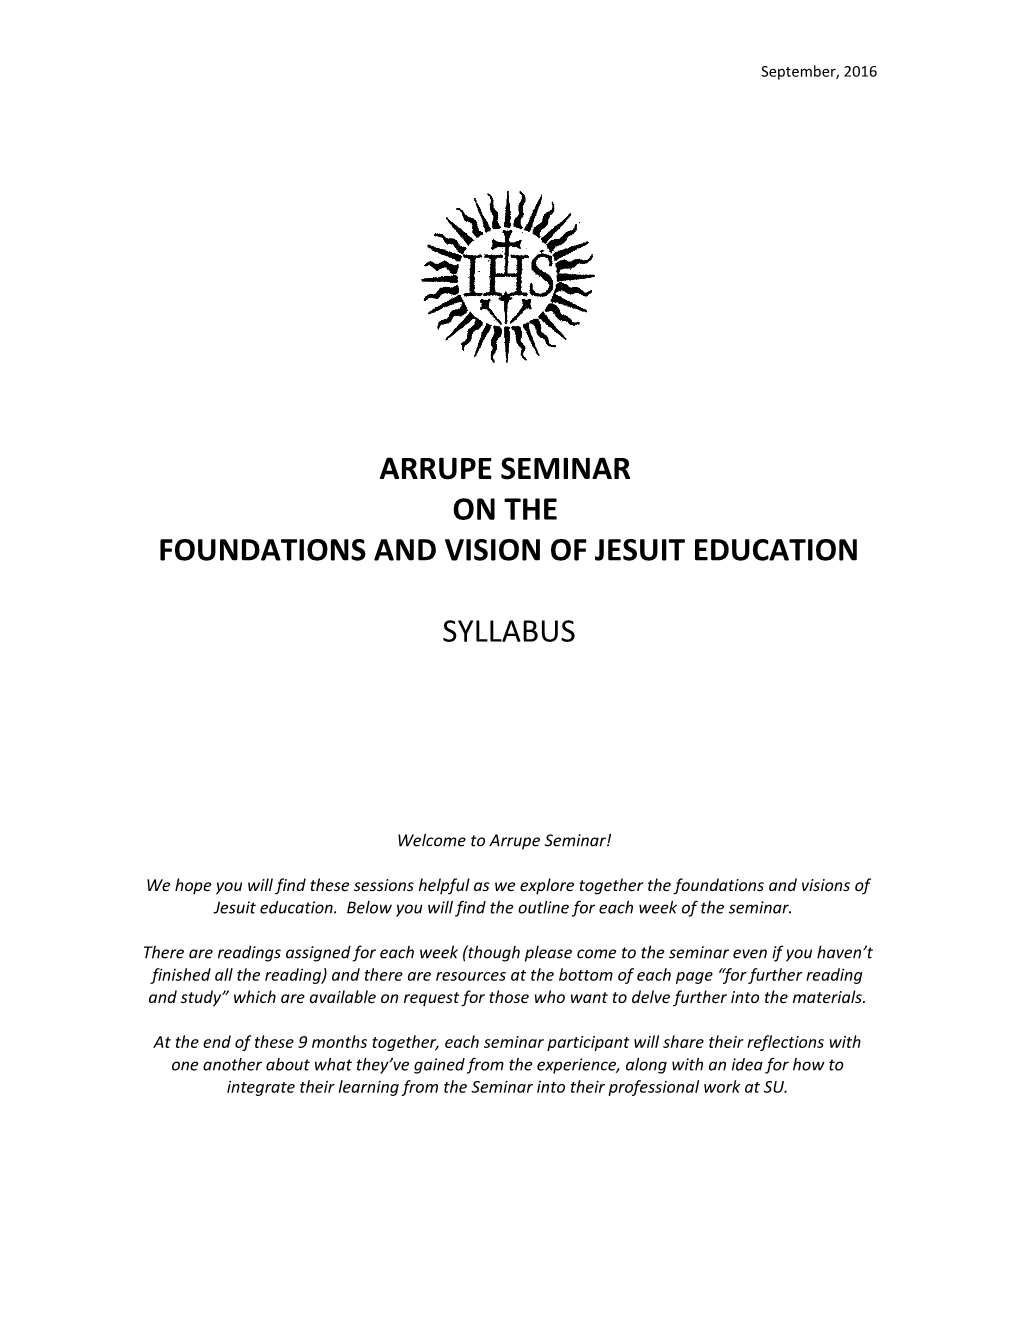 Foundations and Vision of Jesuit Education